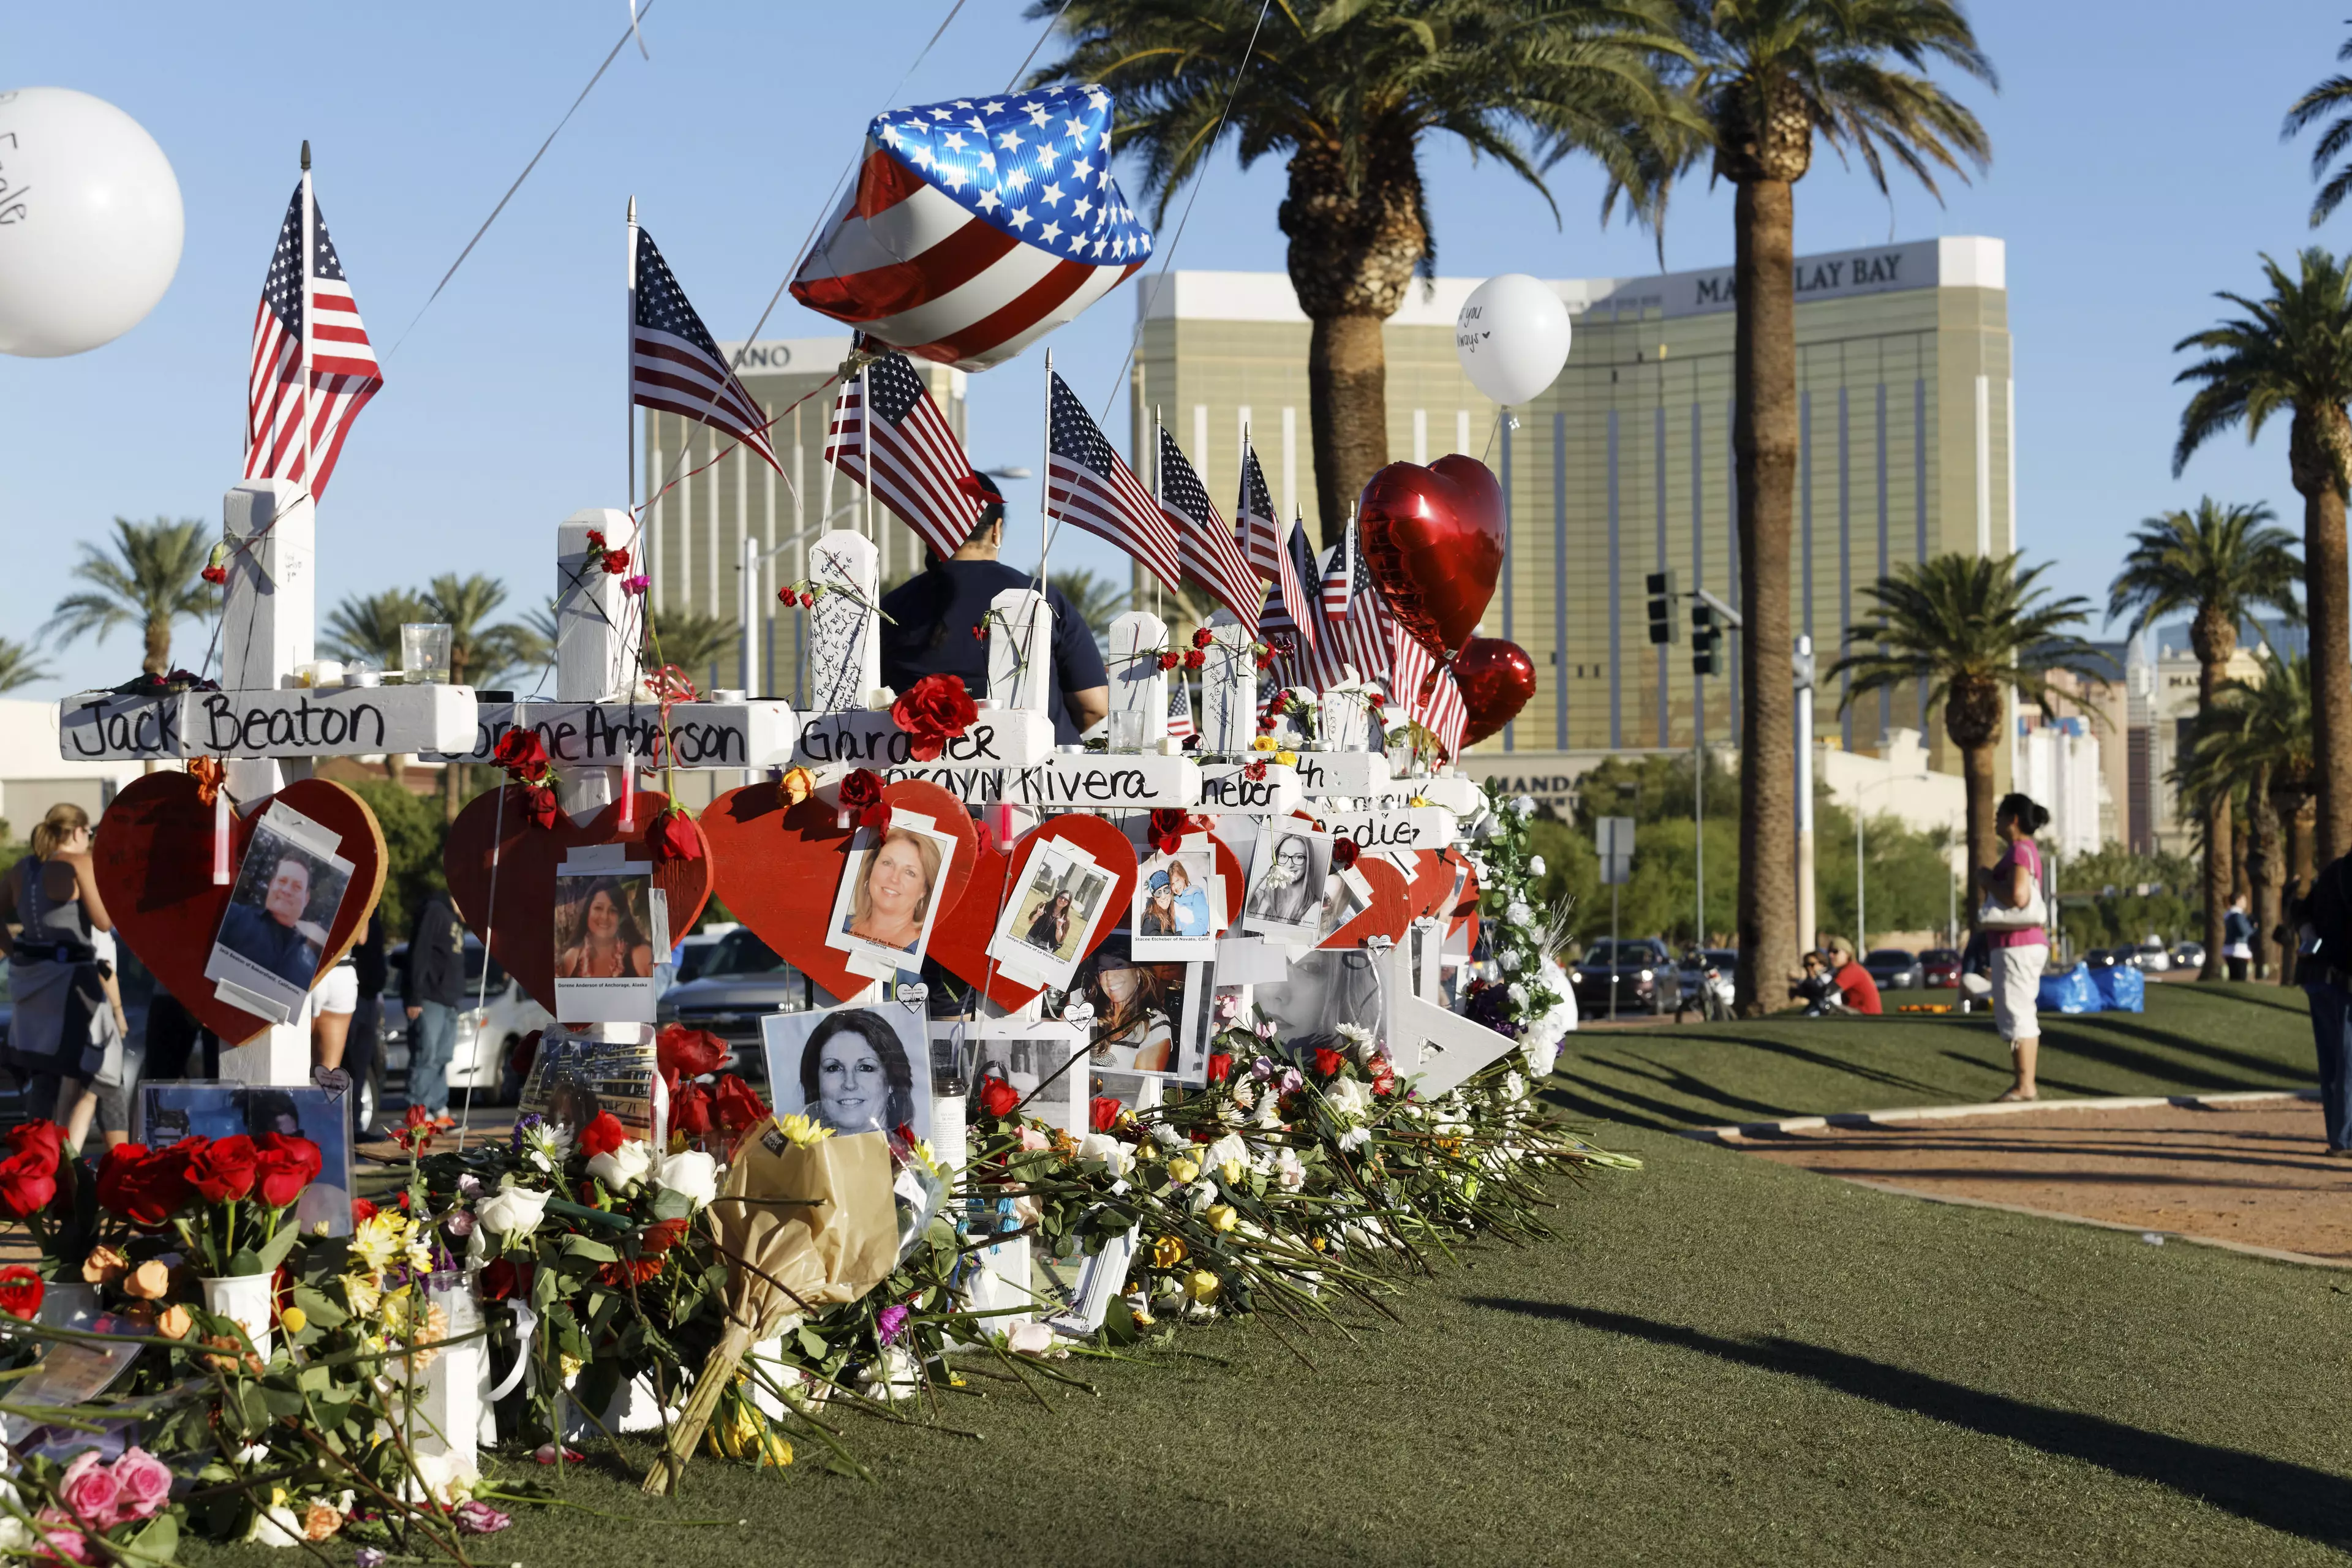 A number of Las Vegas hotels have changed their policies following the shooting last year.